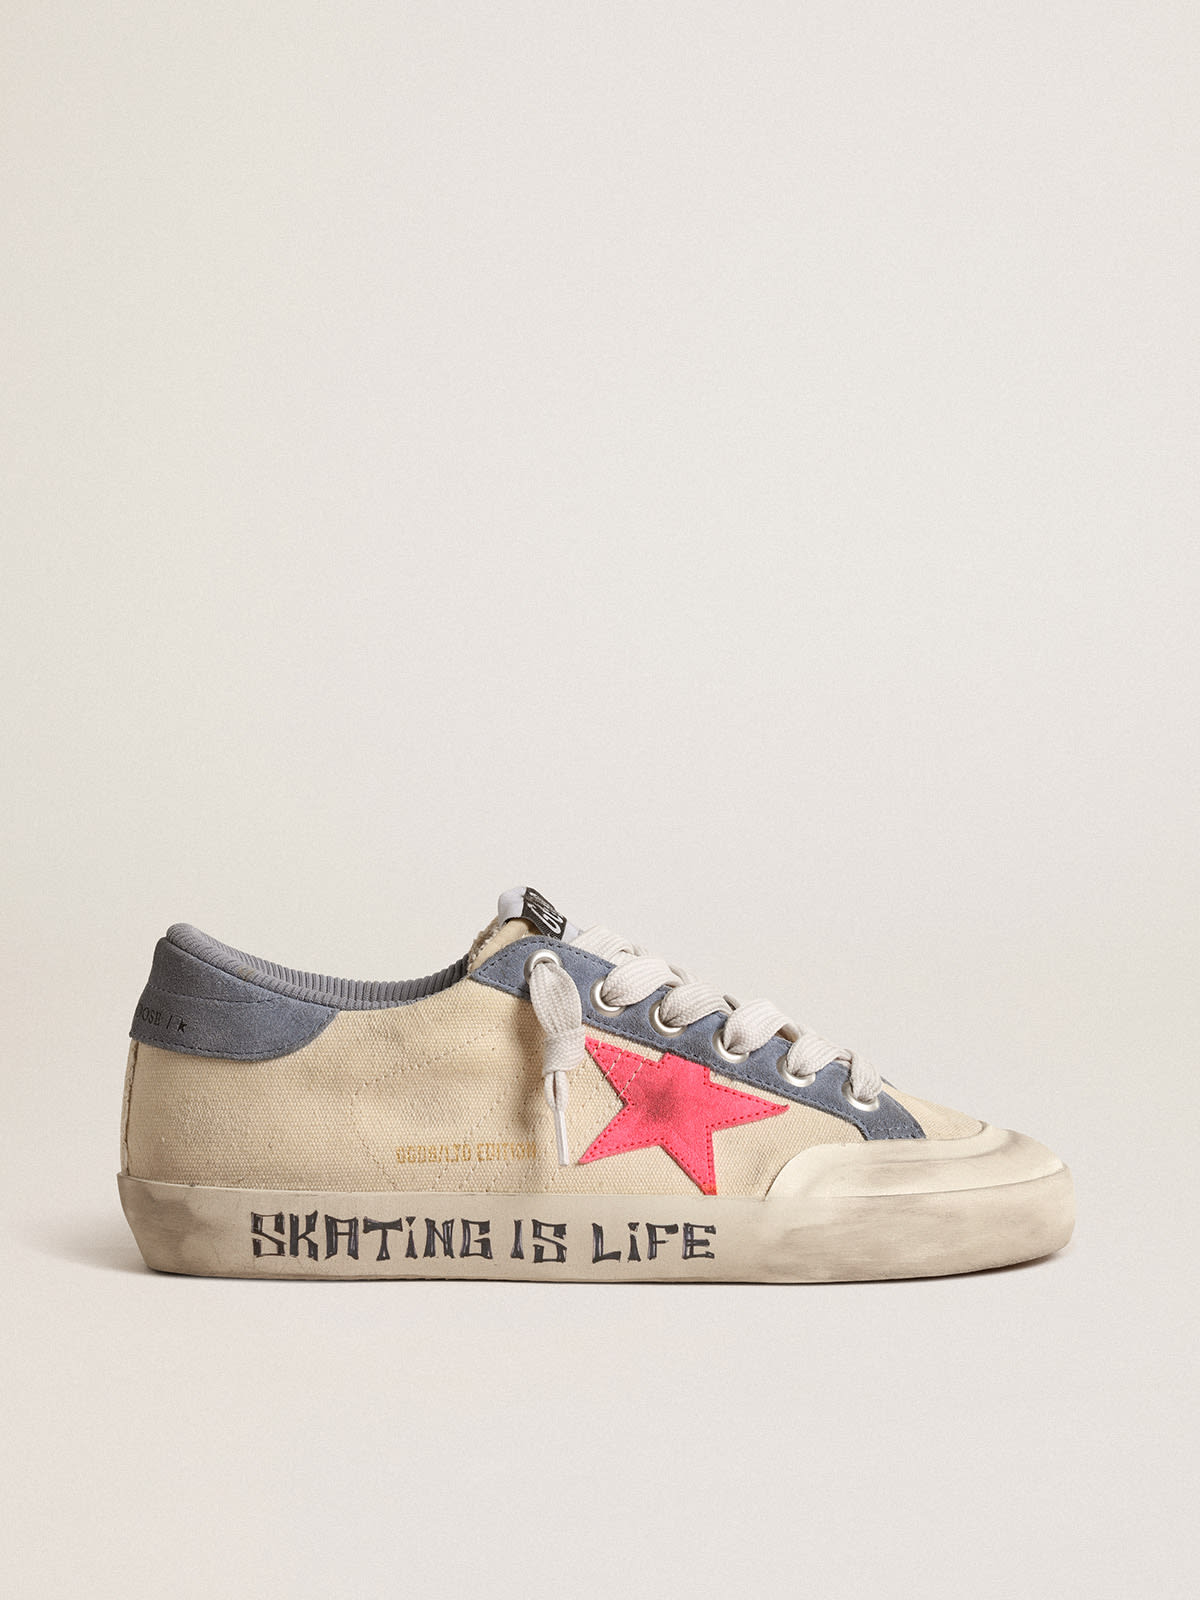 Golden Goose - Super-Star Penstar LTD in canvas with lobster-colored suede star in 